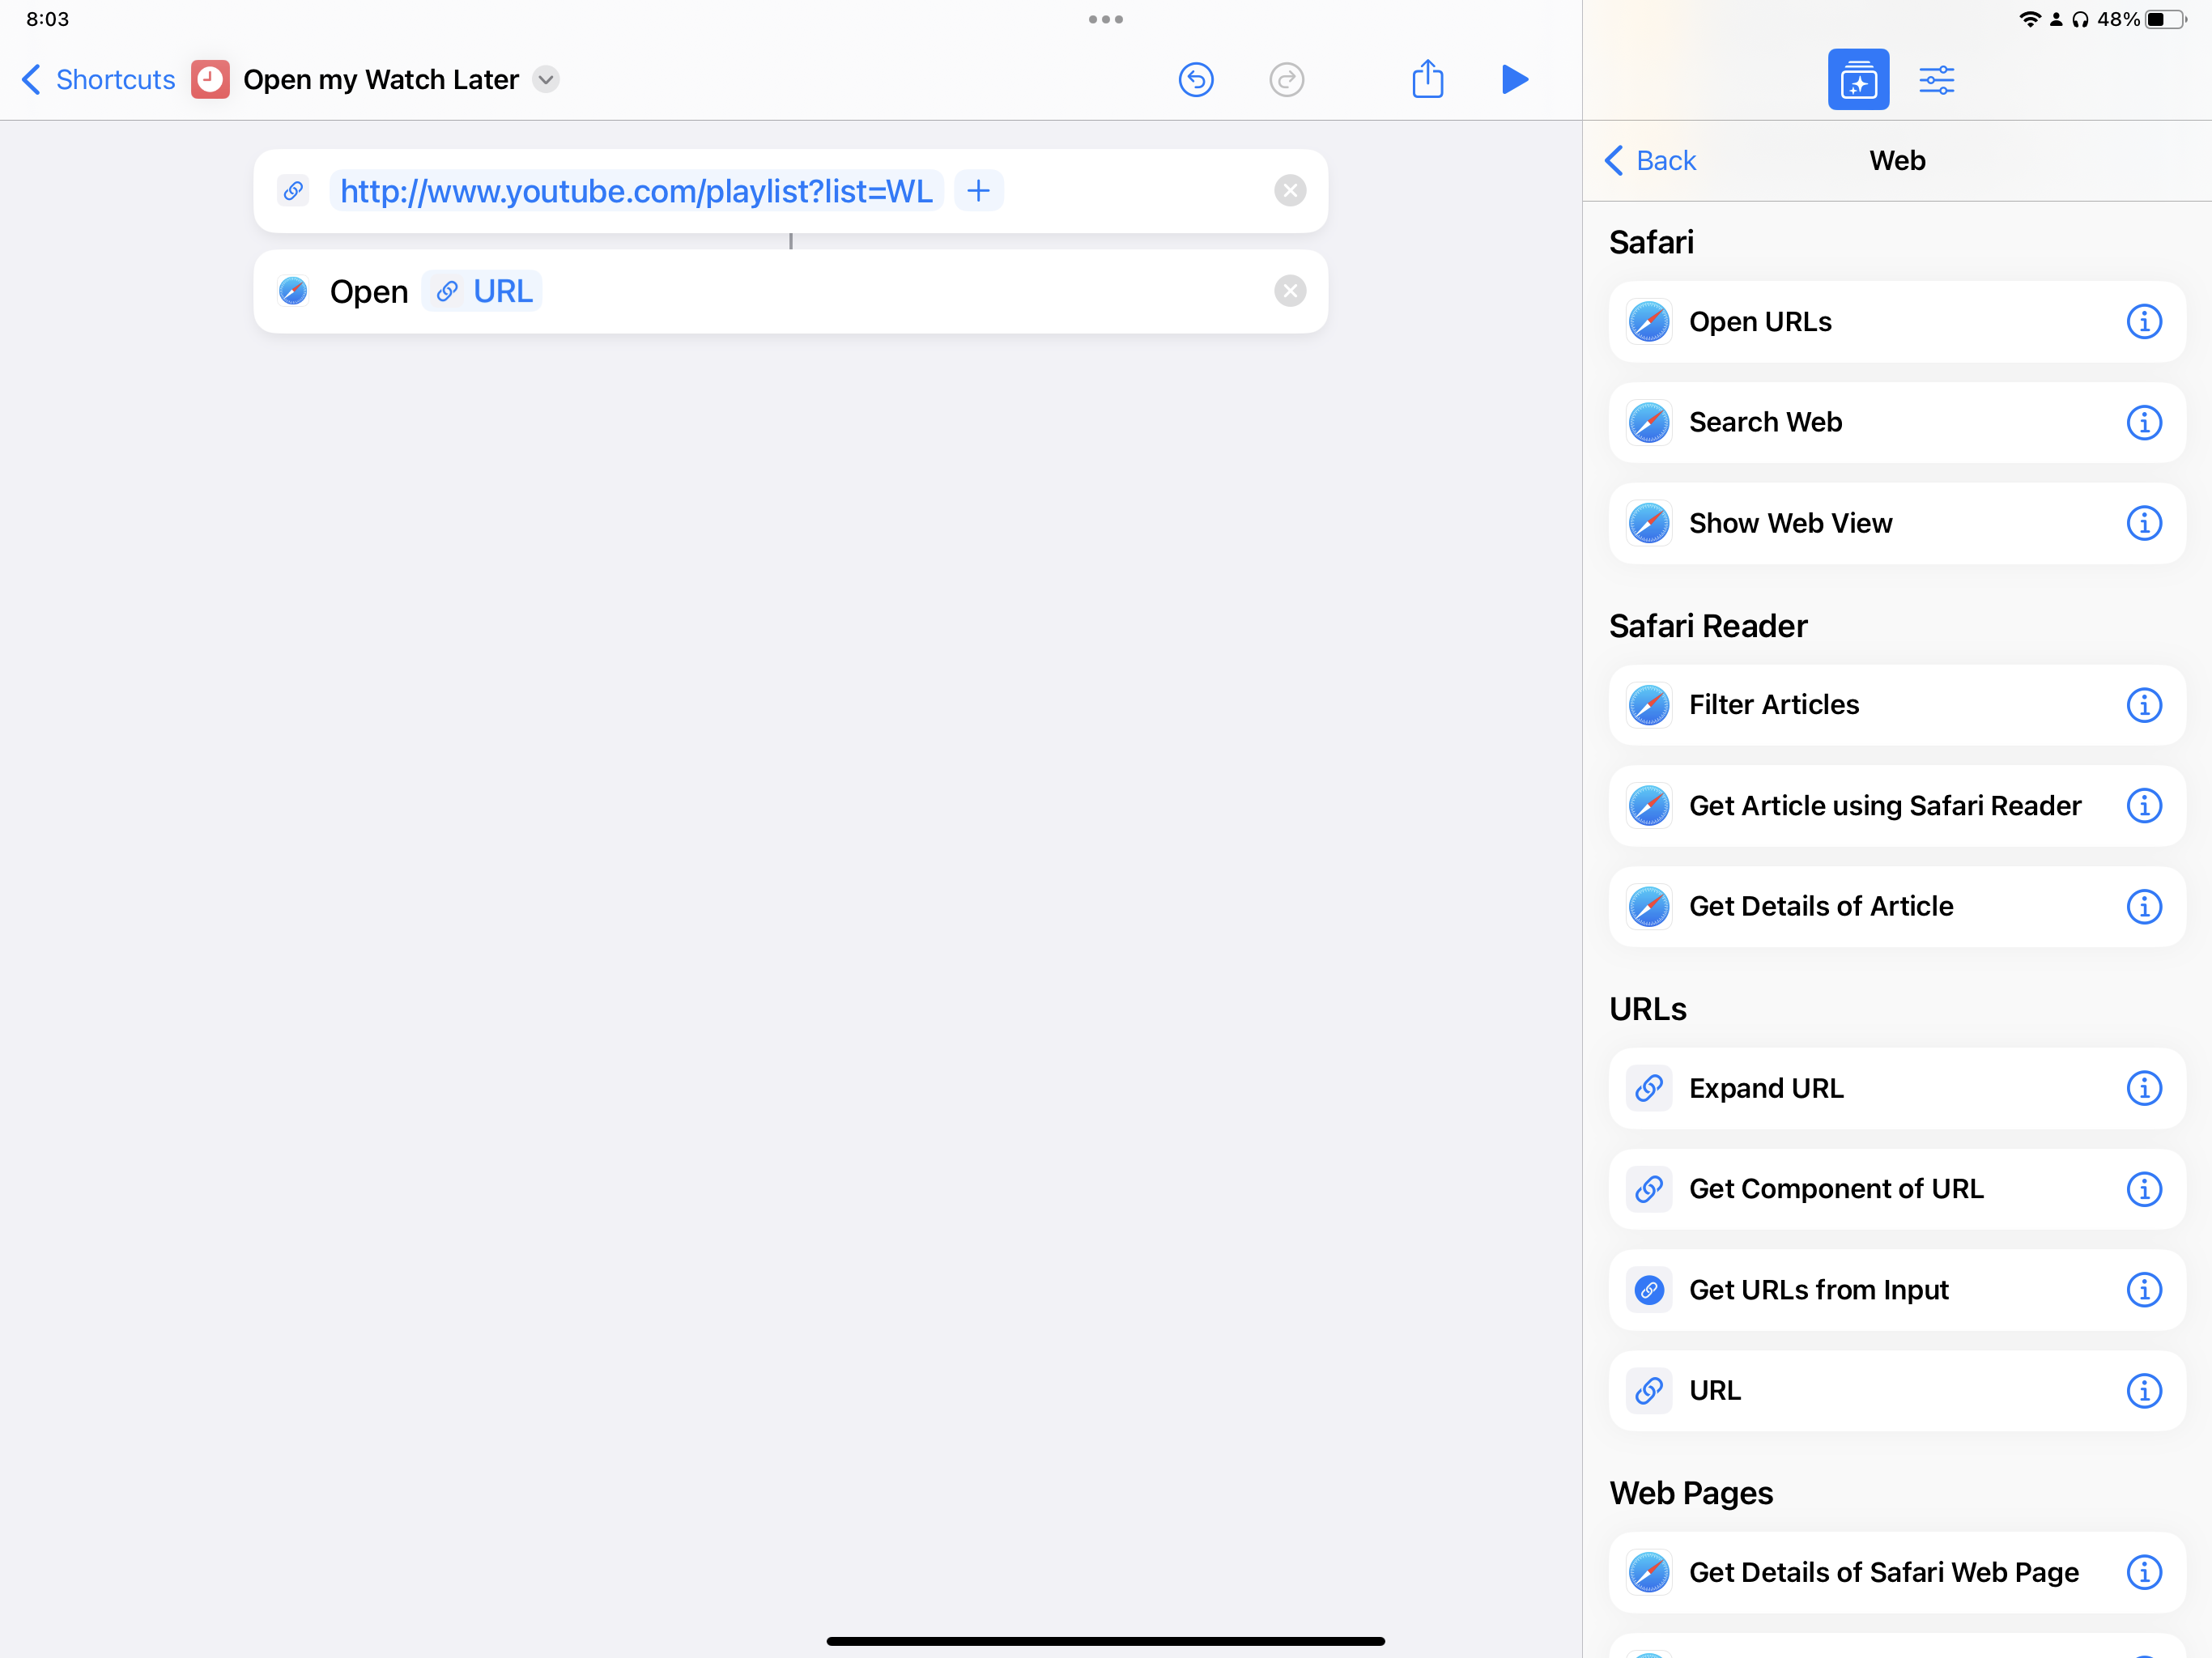 Screenshot of the Open URL action in Shortcuts.